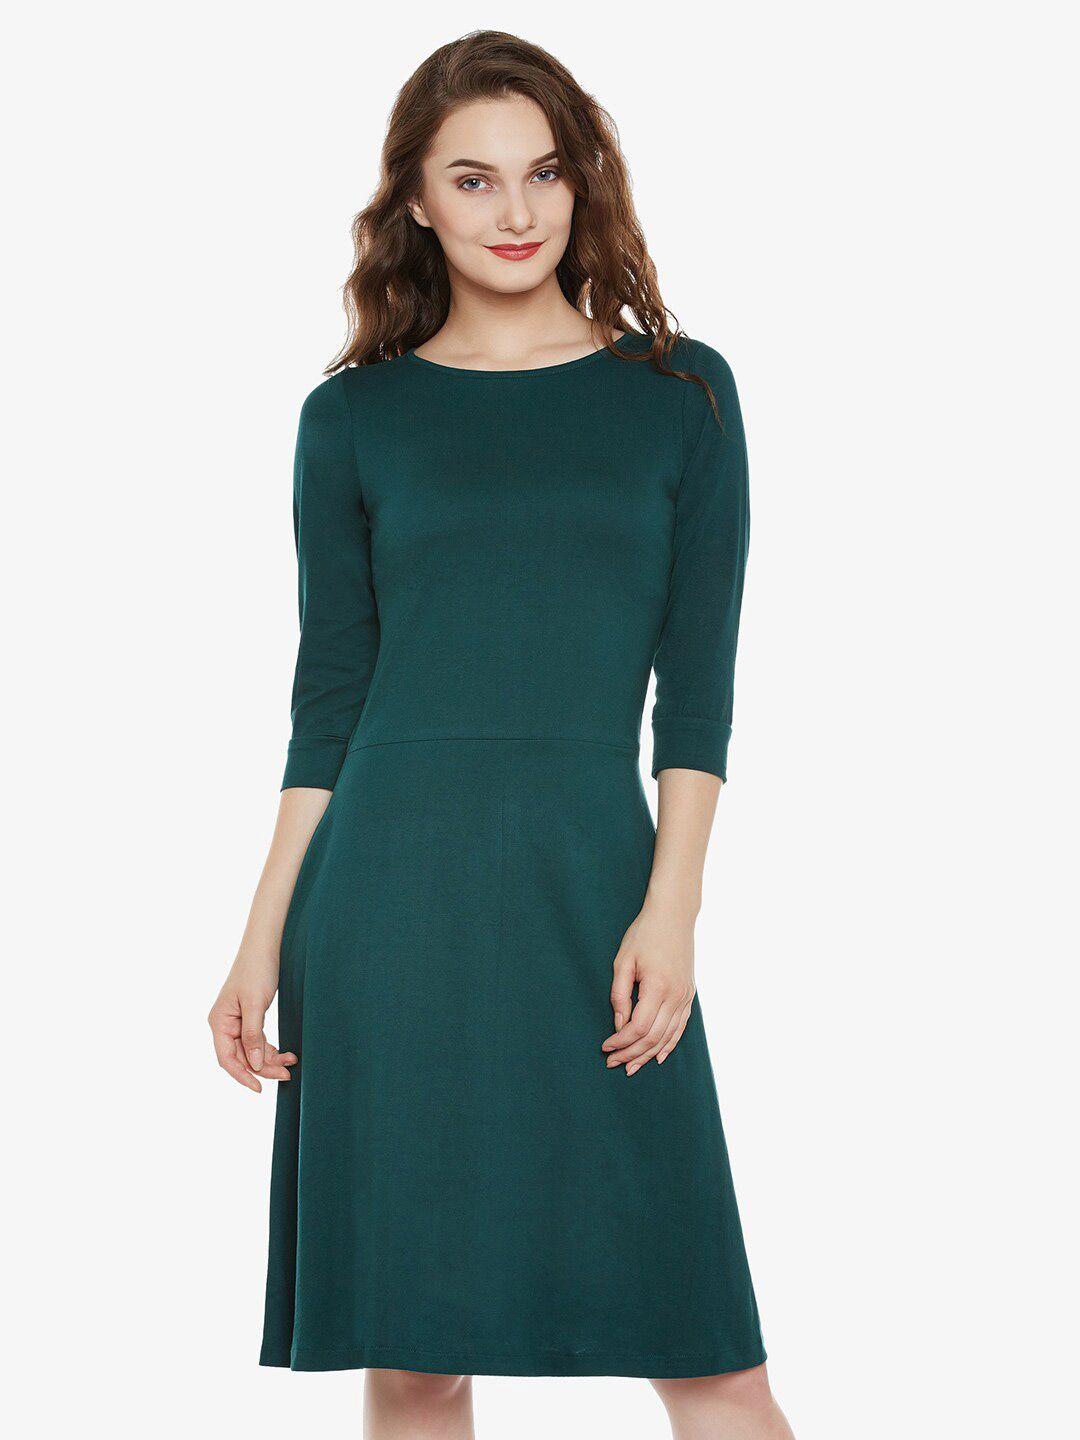 miss-chase-boat-neck-a-line-dress